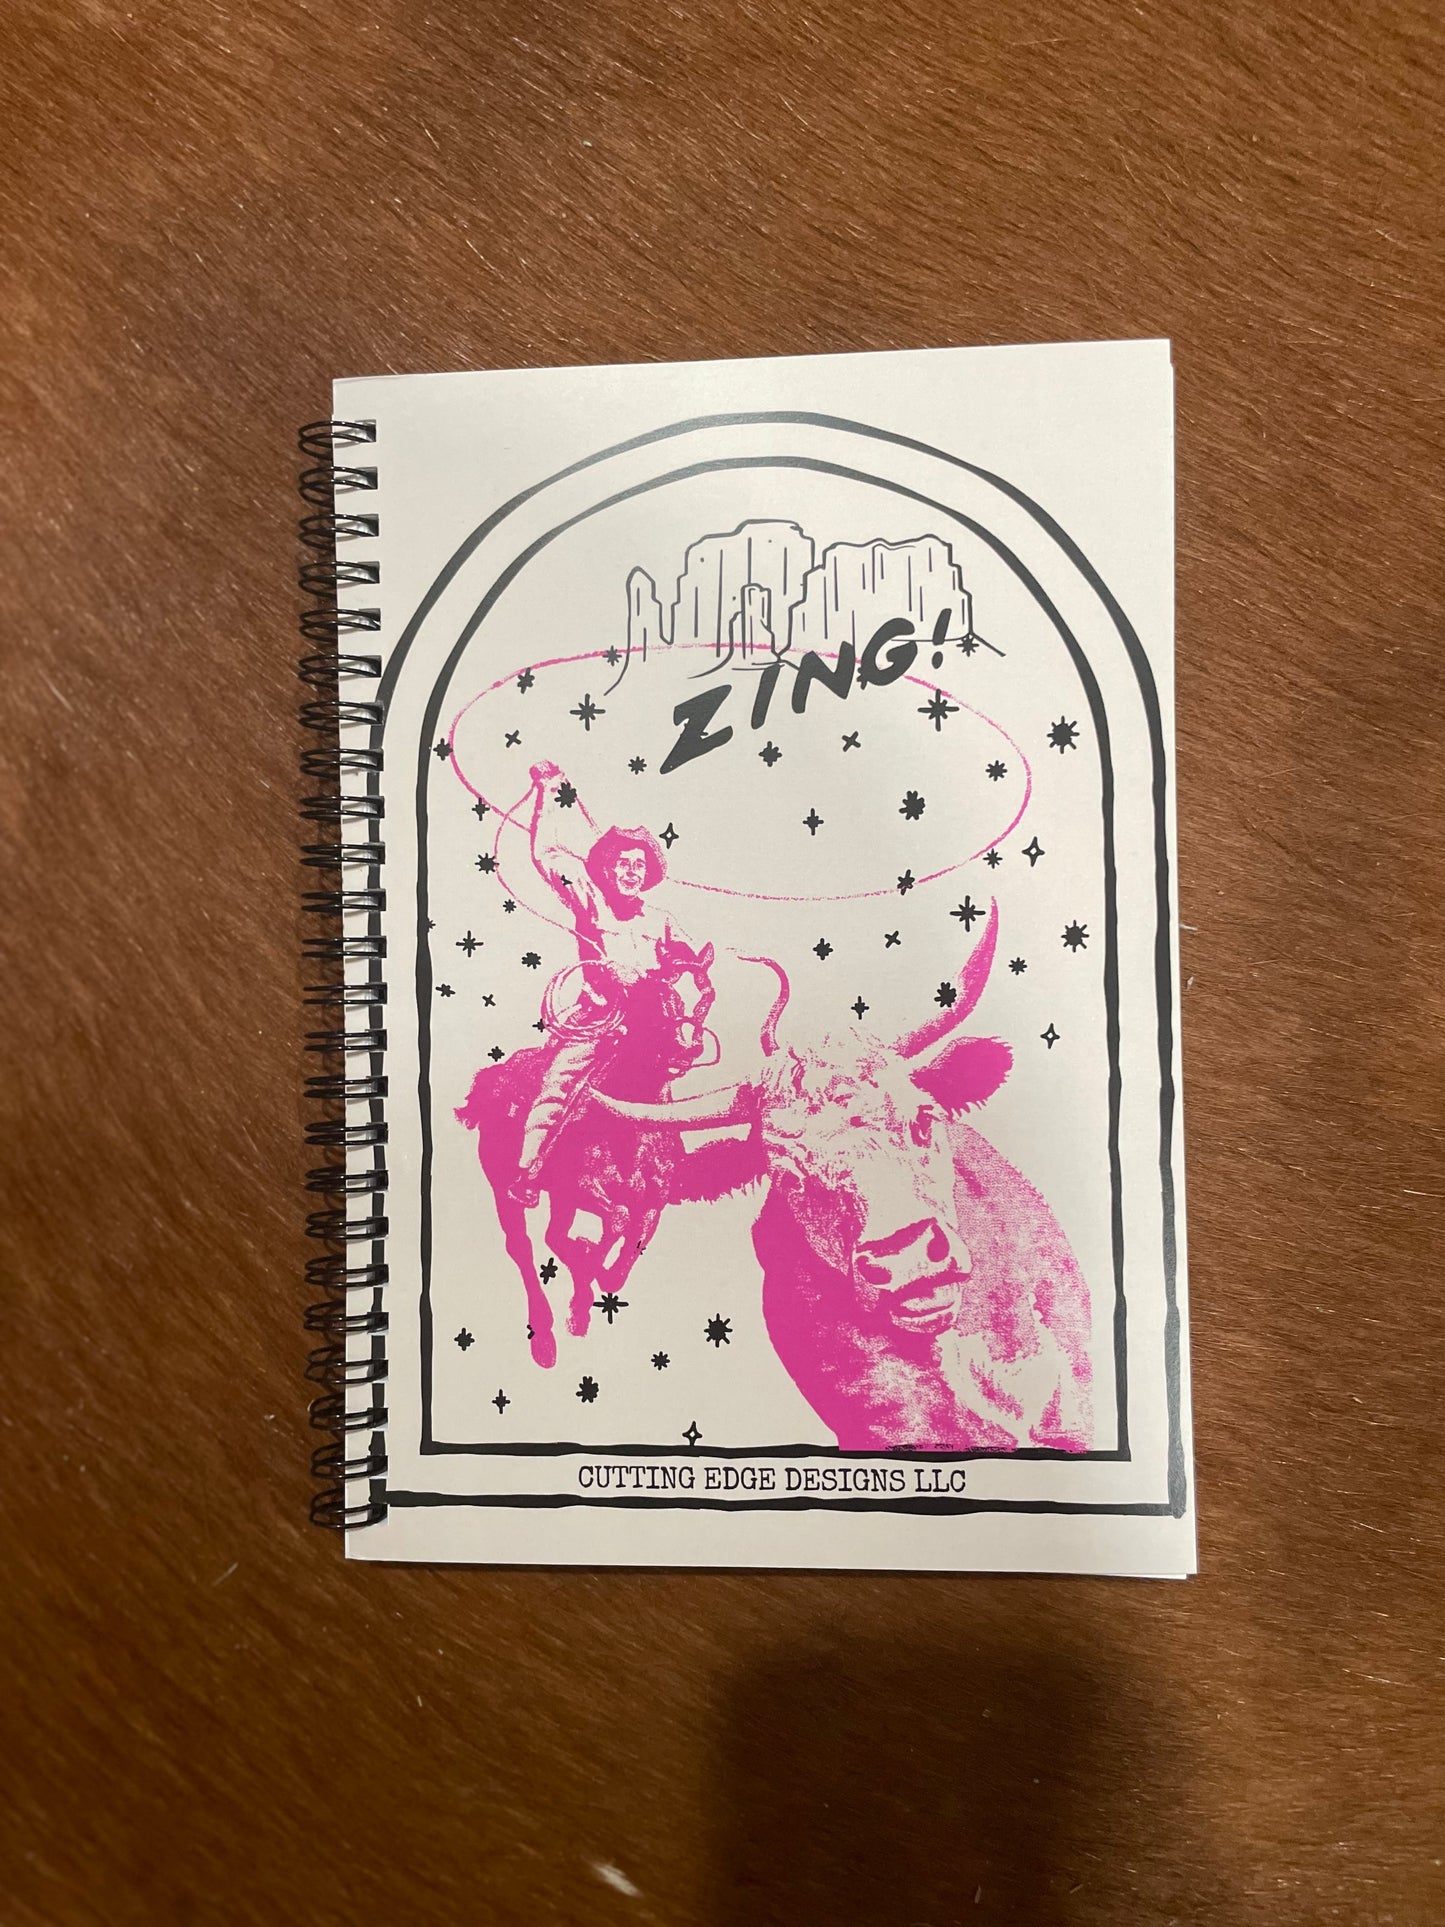 Retro Cowgal Spiral Notebook